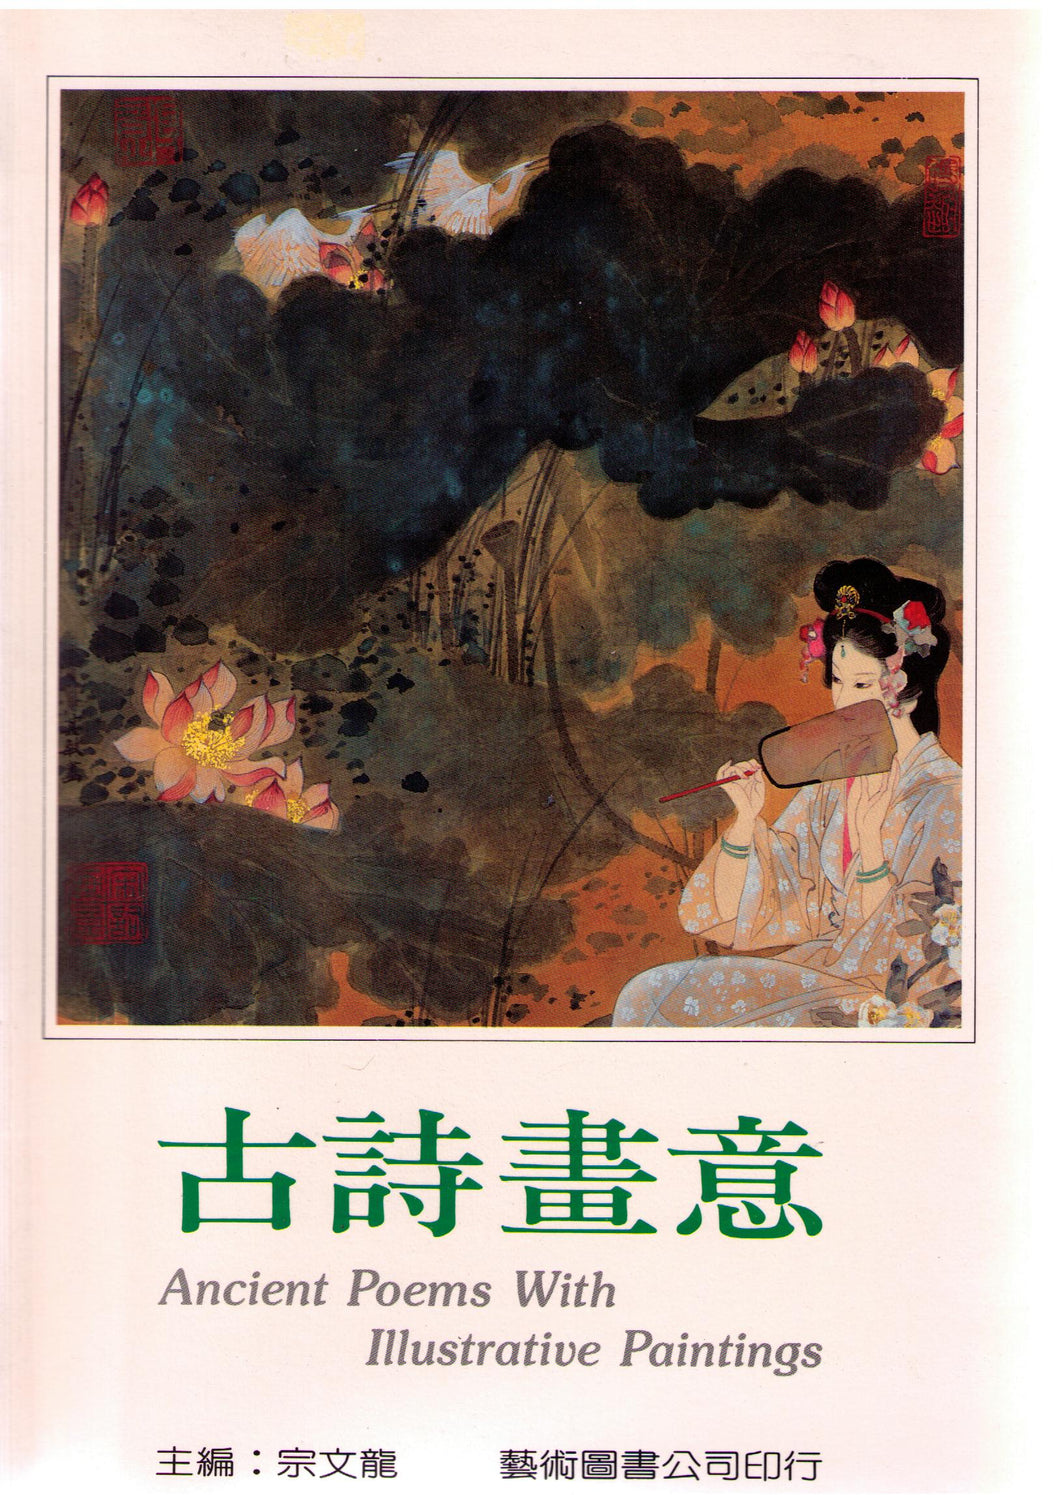 Ancient Poems With Illustrative Paintings 古詩畫意